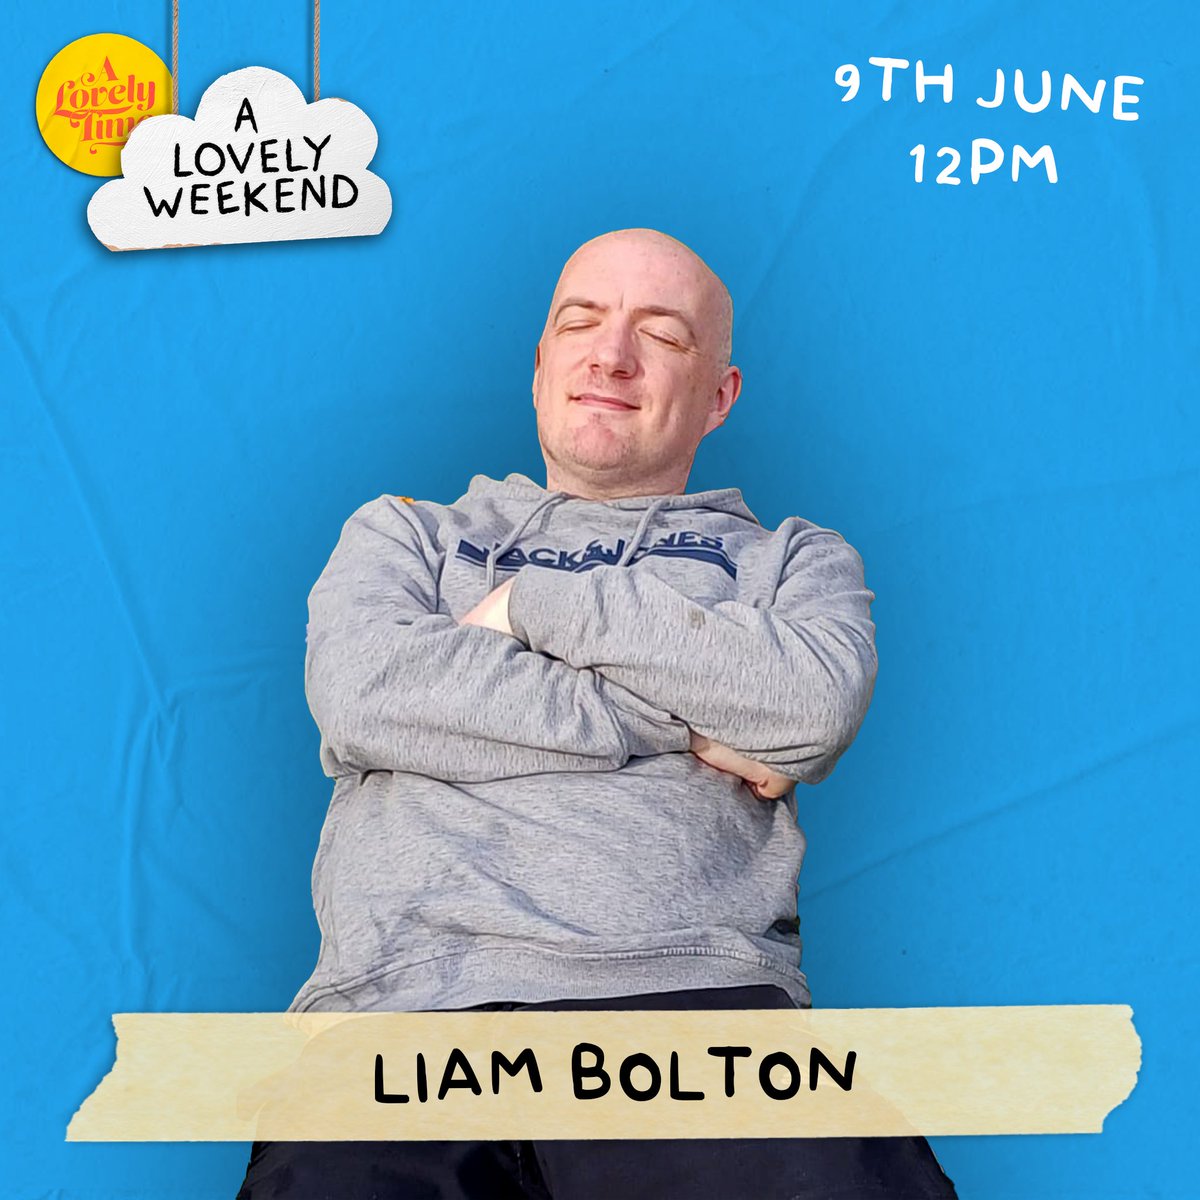 One of the main reasons we're looking forward to A Lovely Weekend in June is the chance to see @liam__bolton's debut show. If you've never seen Liam before, do yourself a favour and come down. If you have, well, what are you waiting for? 🎟️: seetickets.com/event/liam-bol…